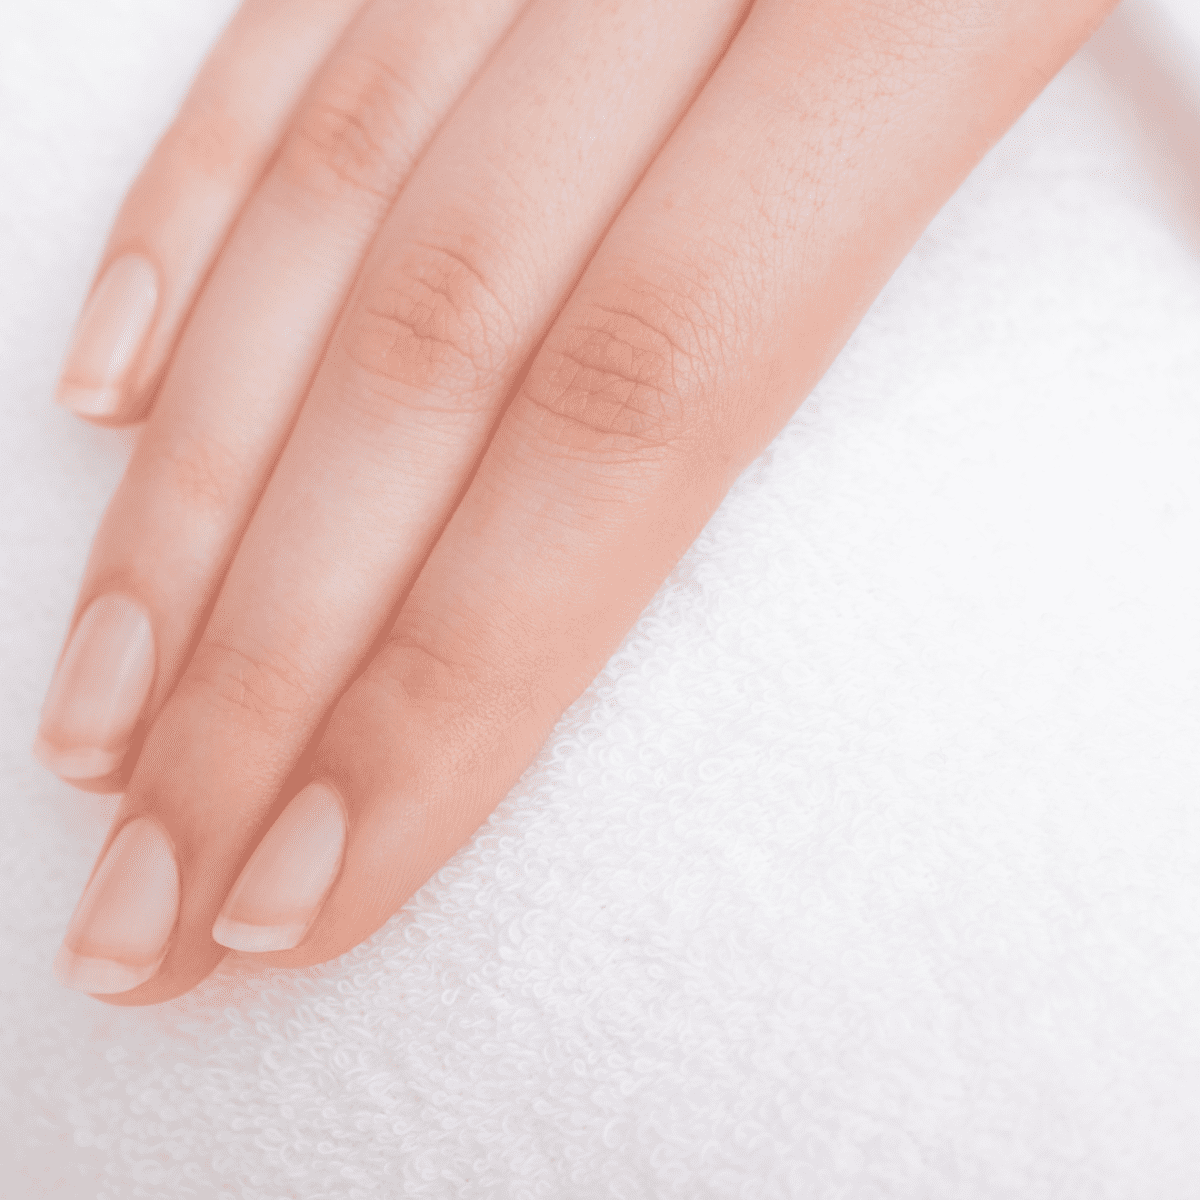 Follow these 5 easy ways to protect your nail in winter | HealthShots